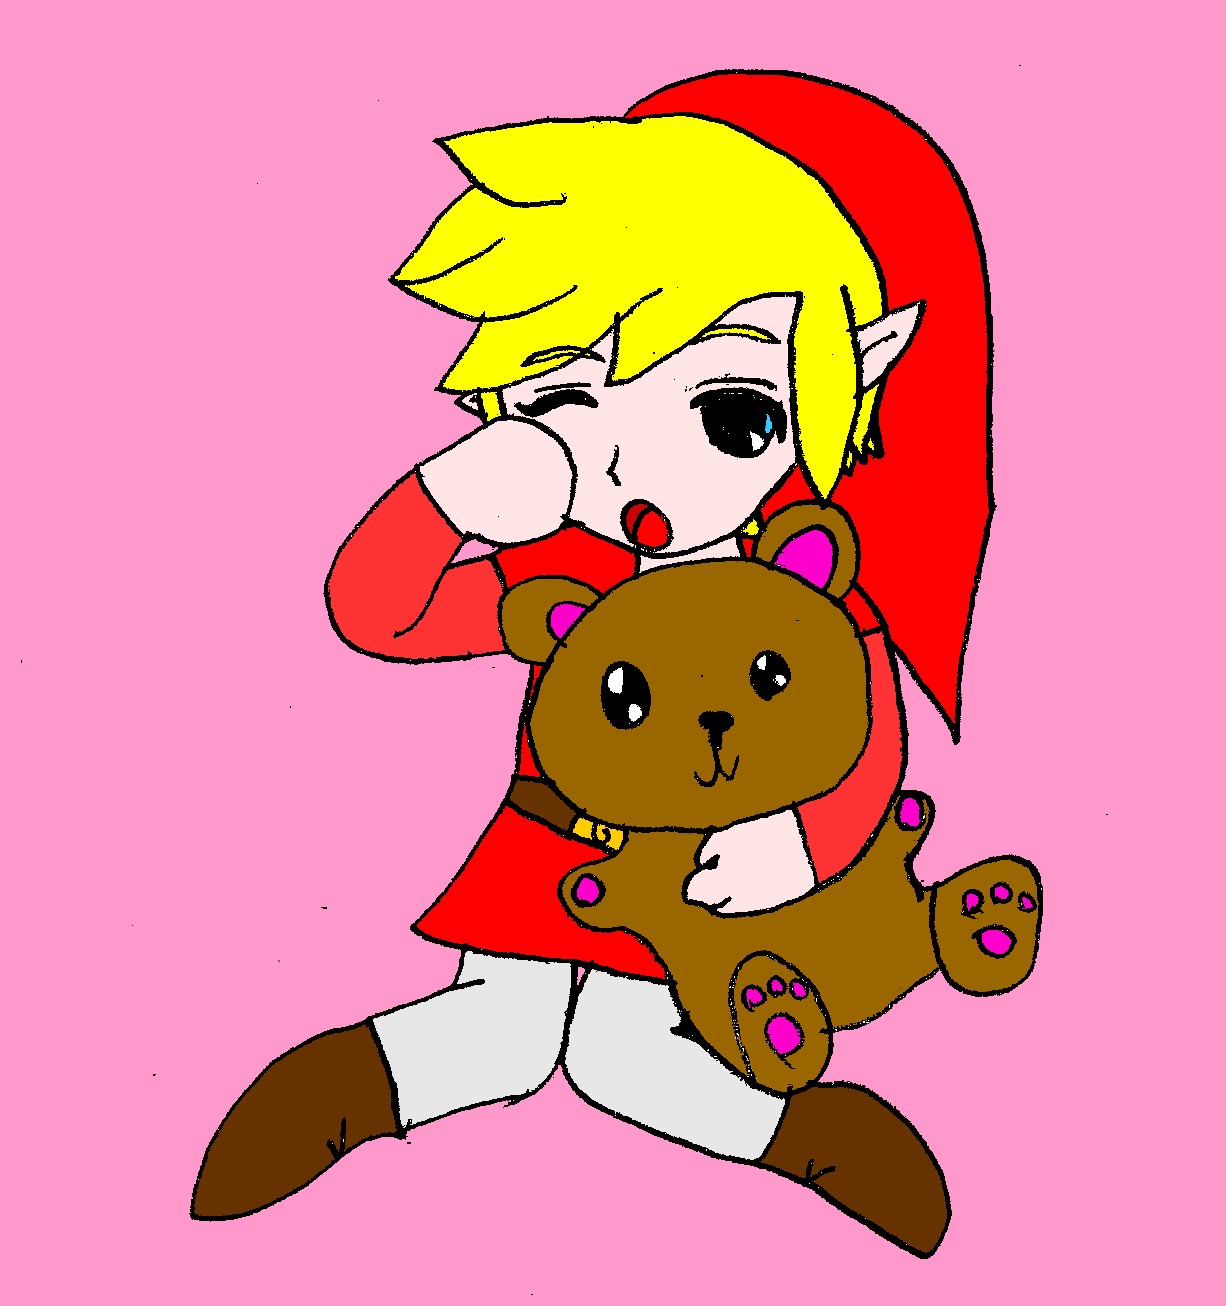 Tired Little red Link. by amelia